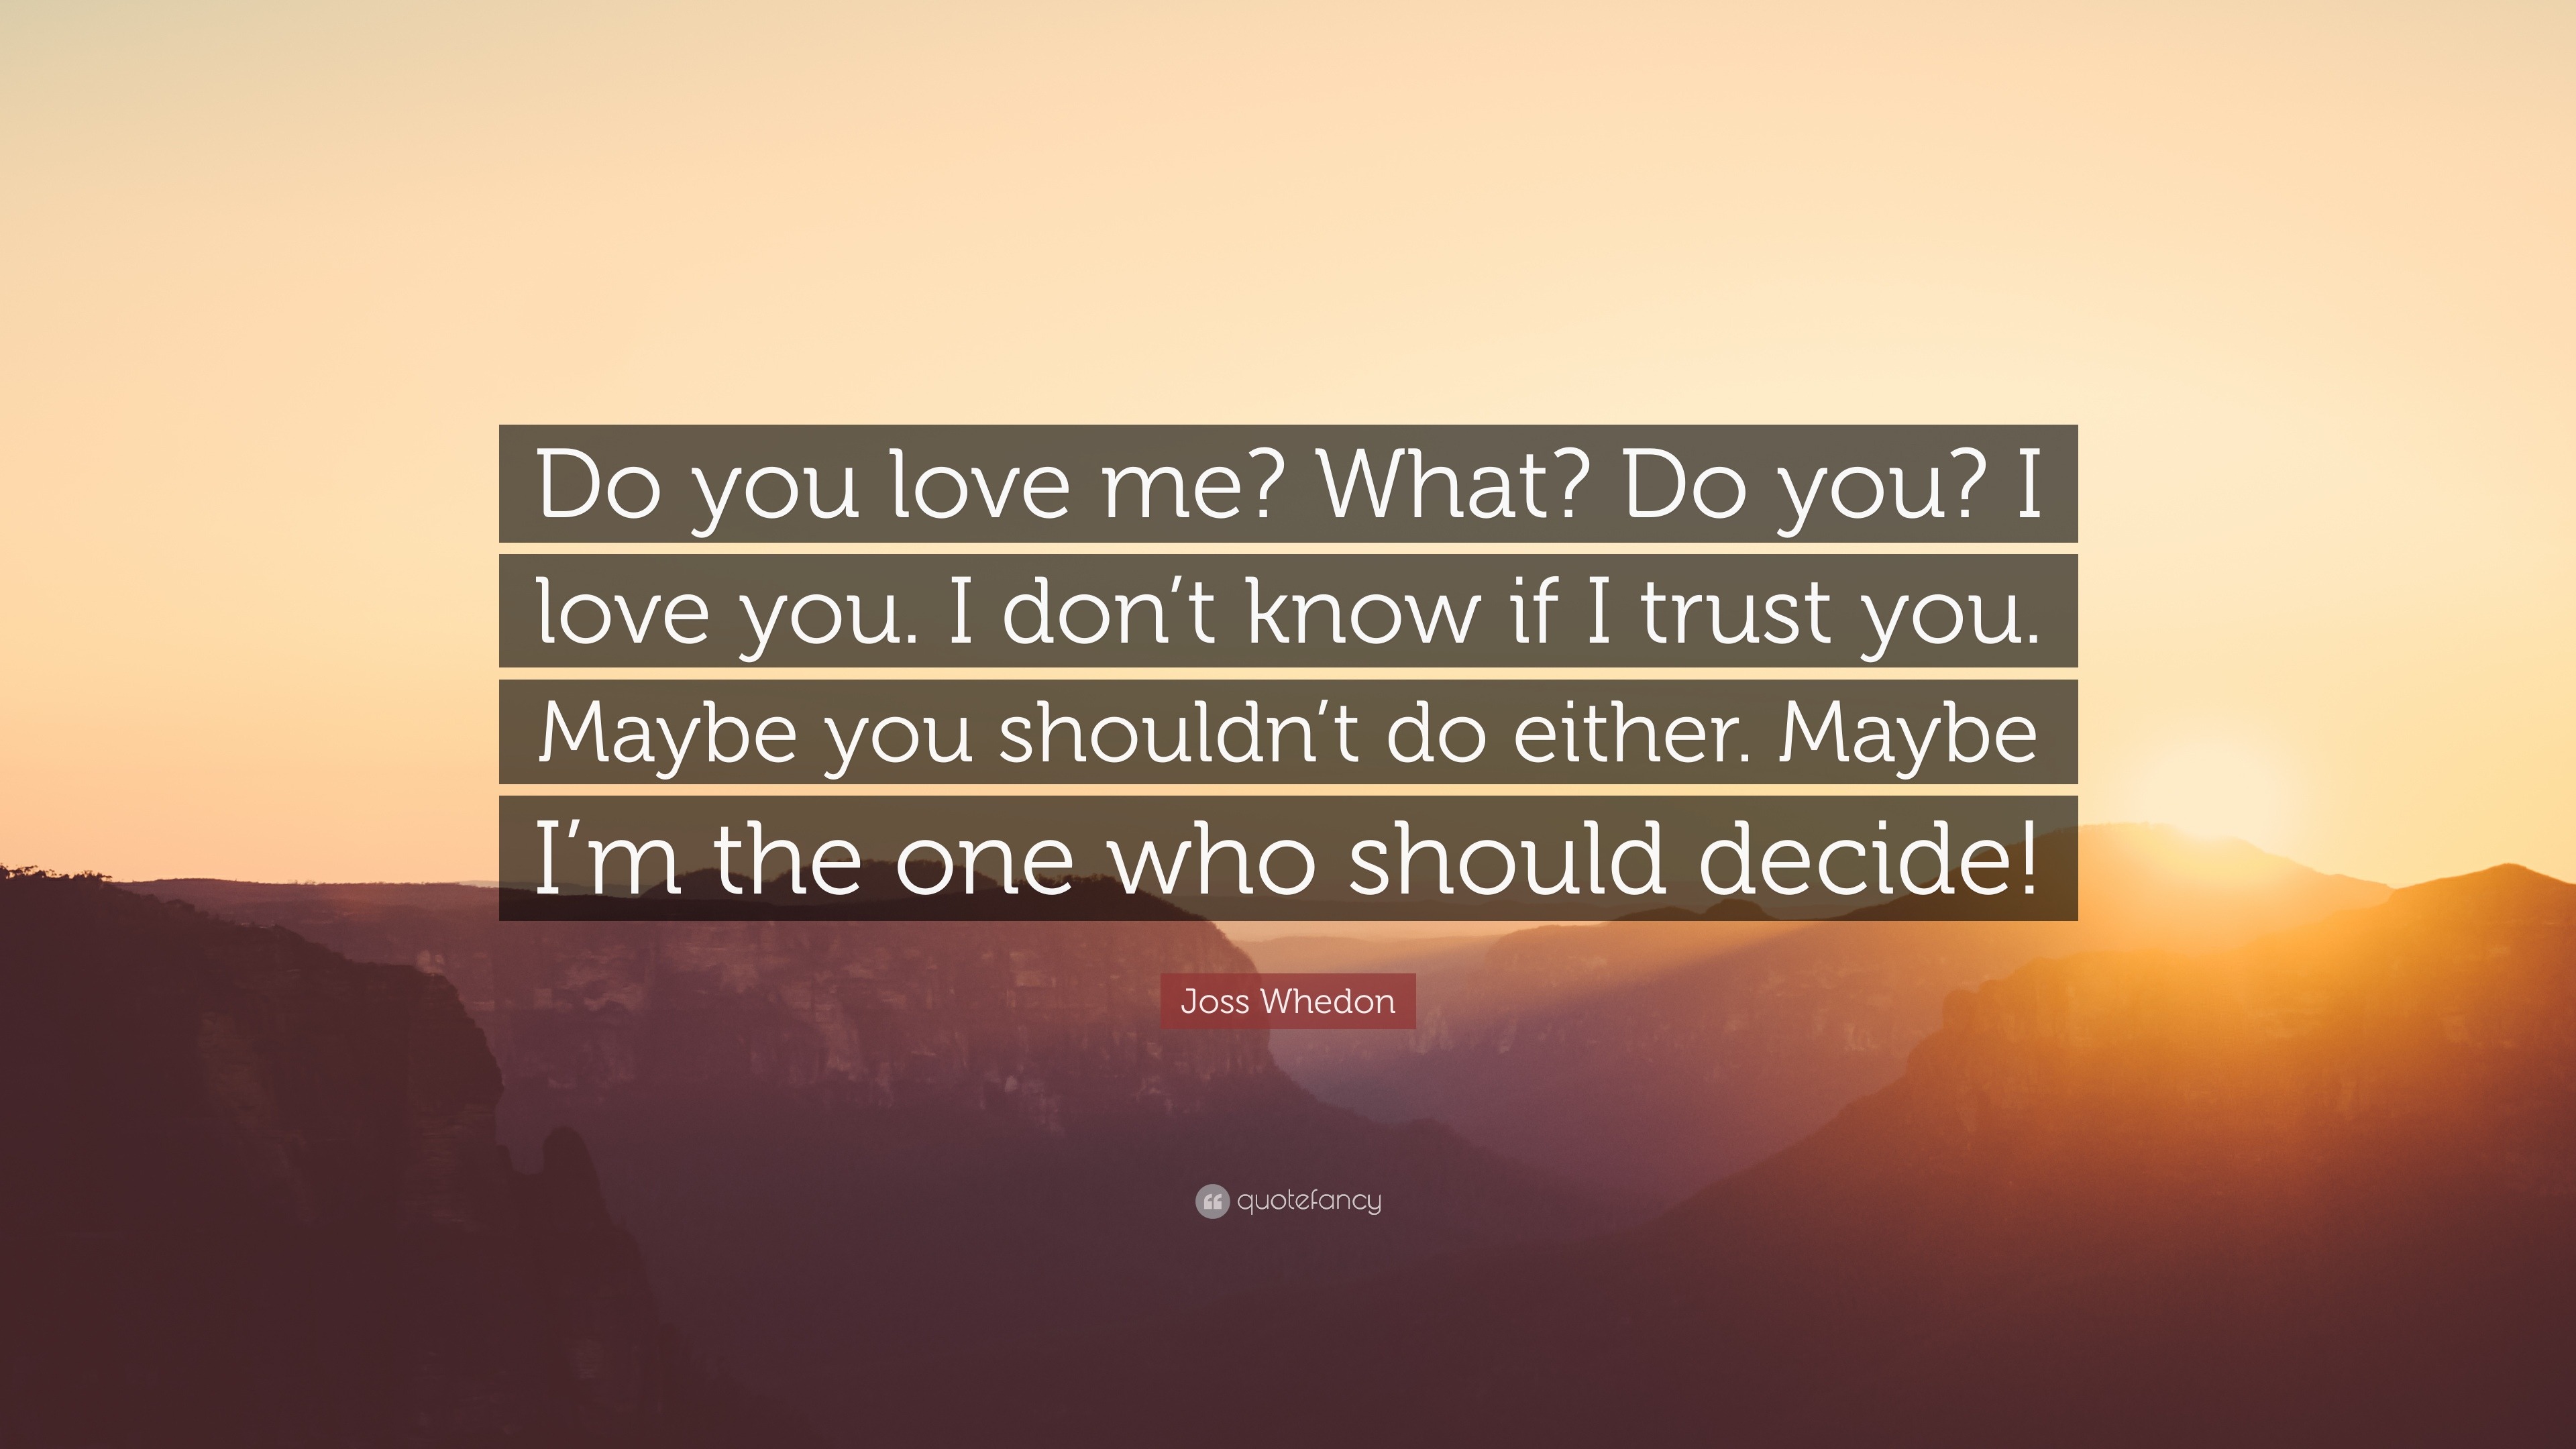 Joss Whedon Quote “Do you love me What Do you I